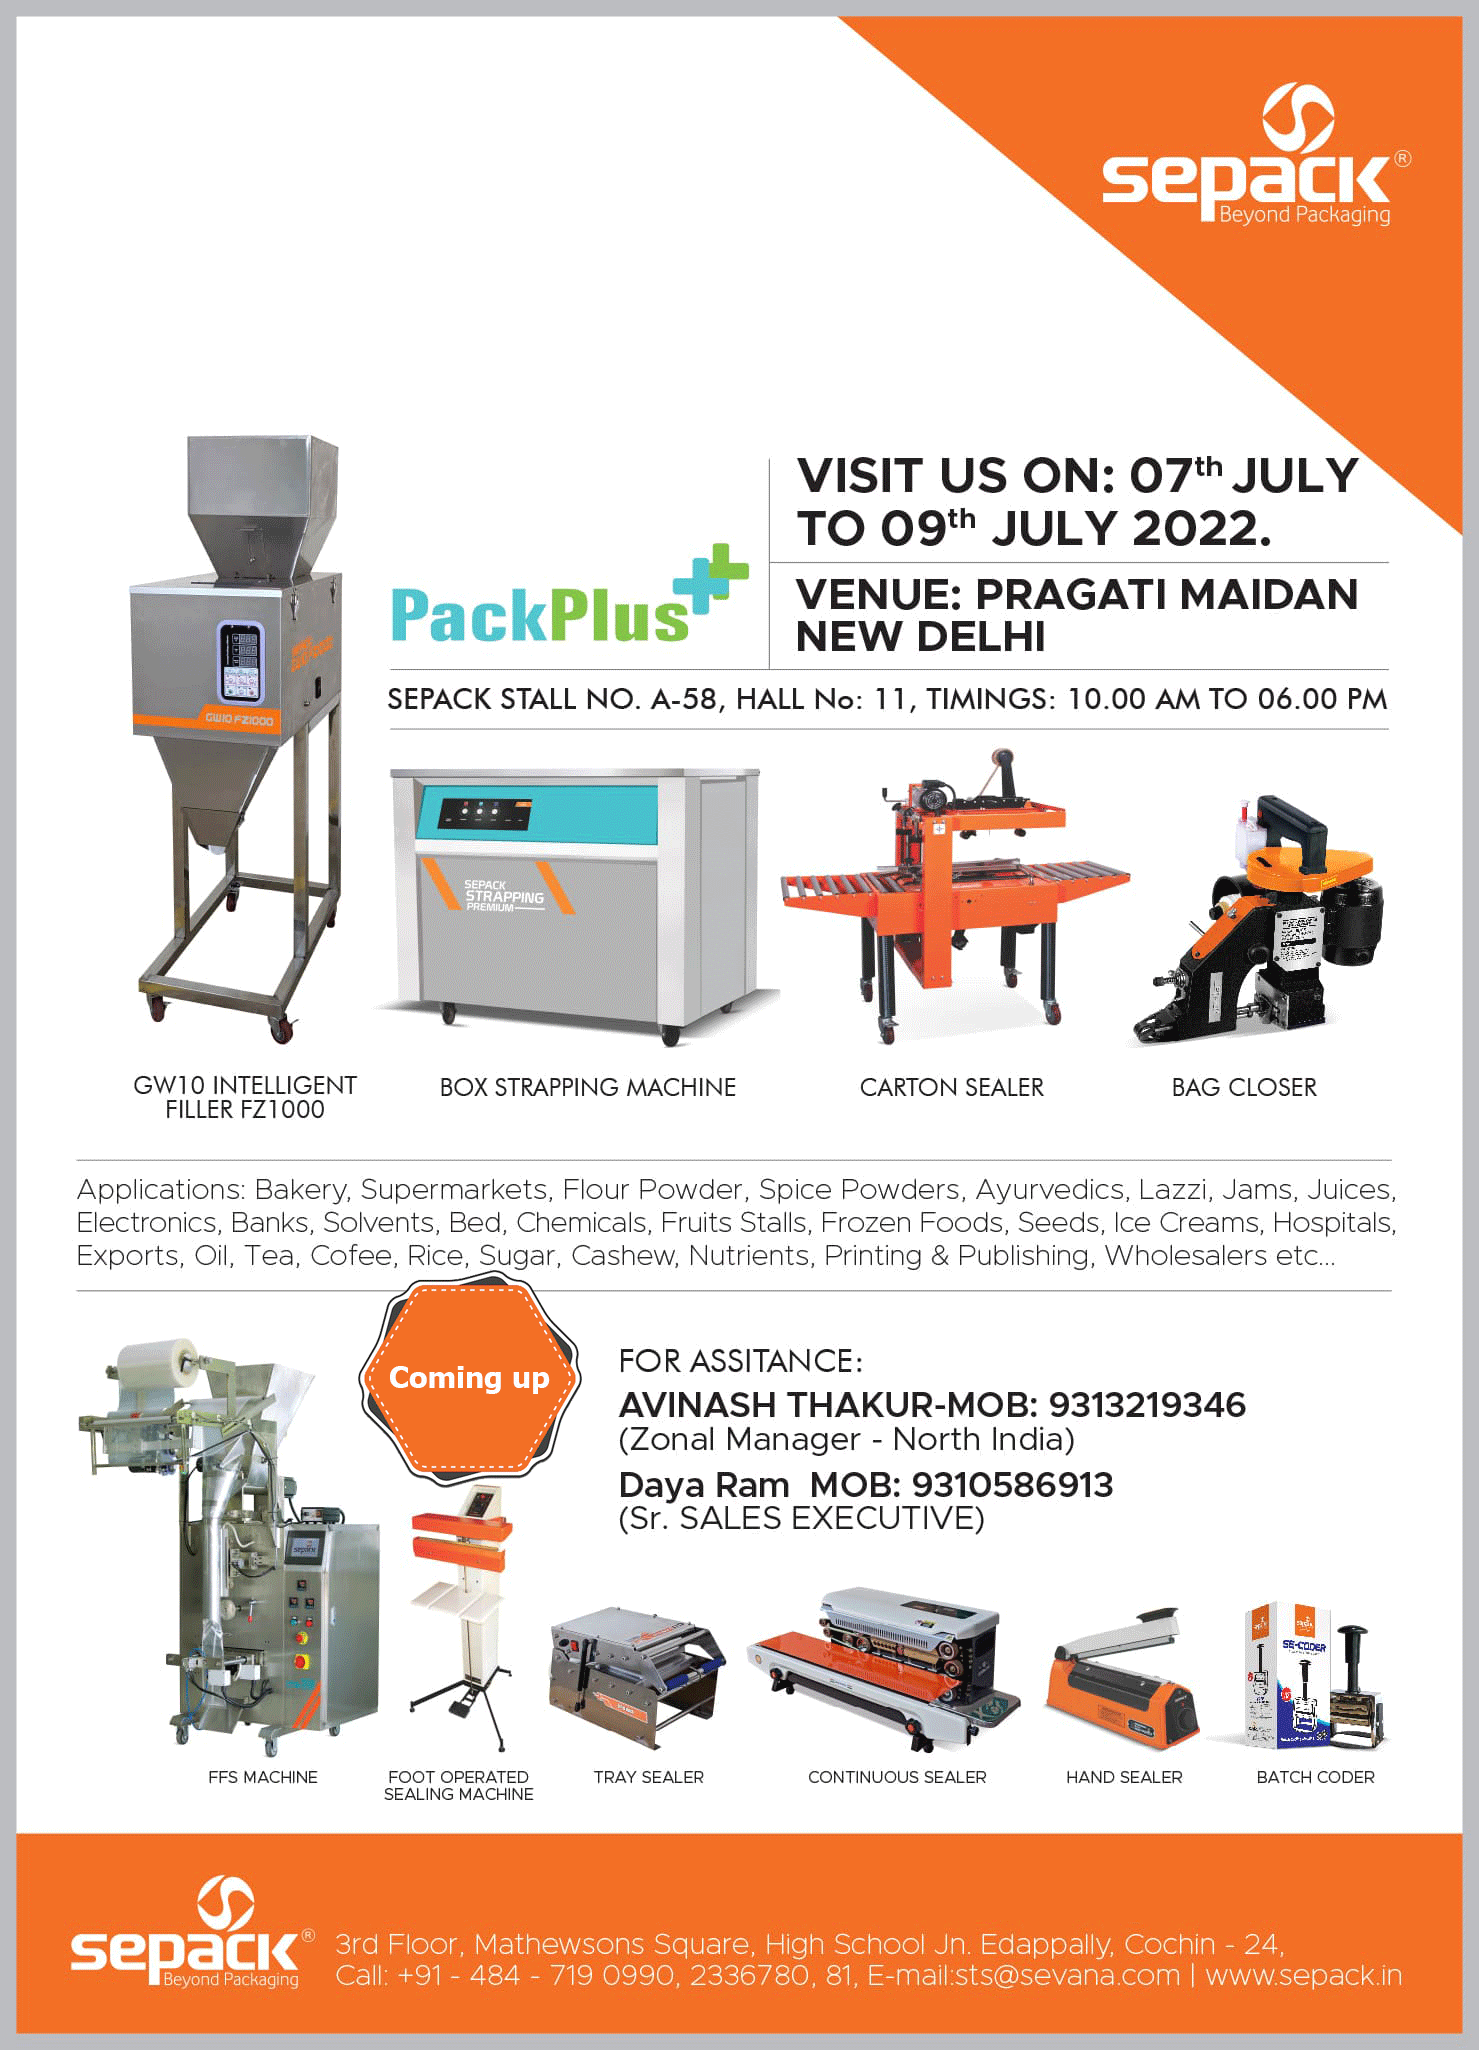 PackPlus Expo 2022